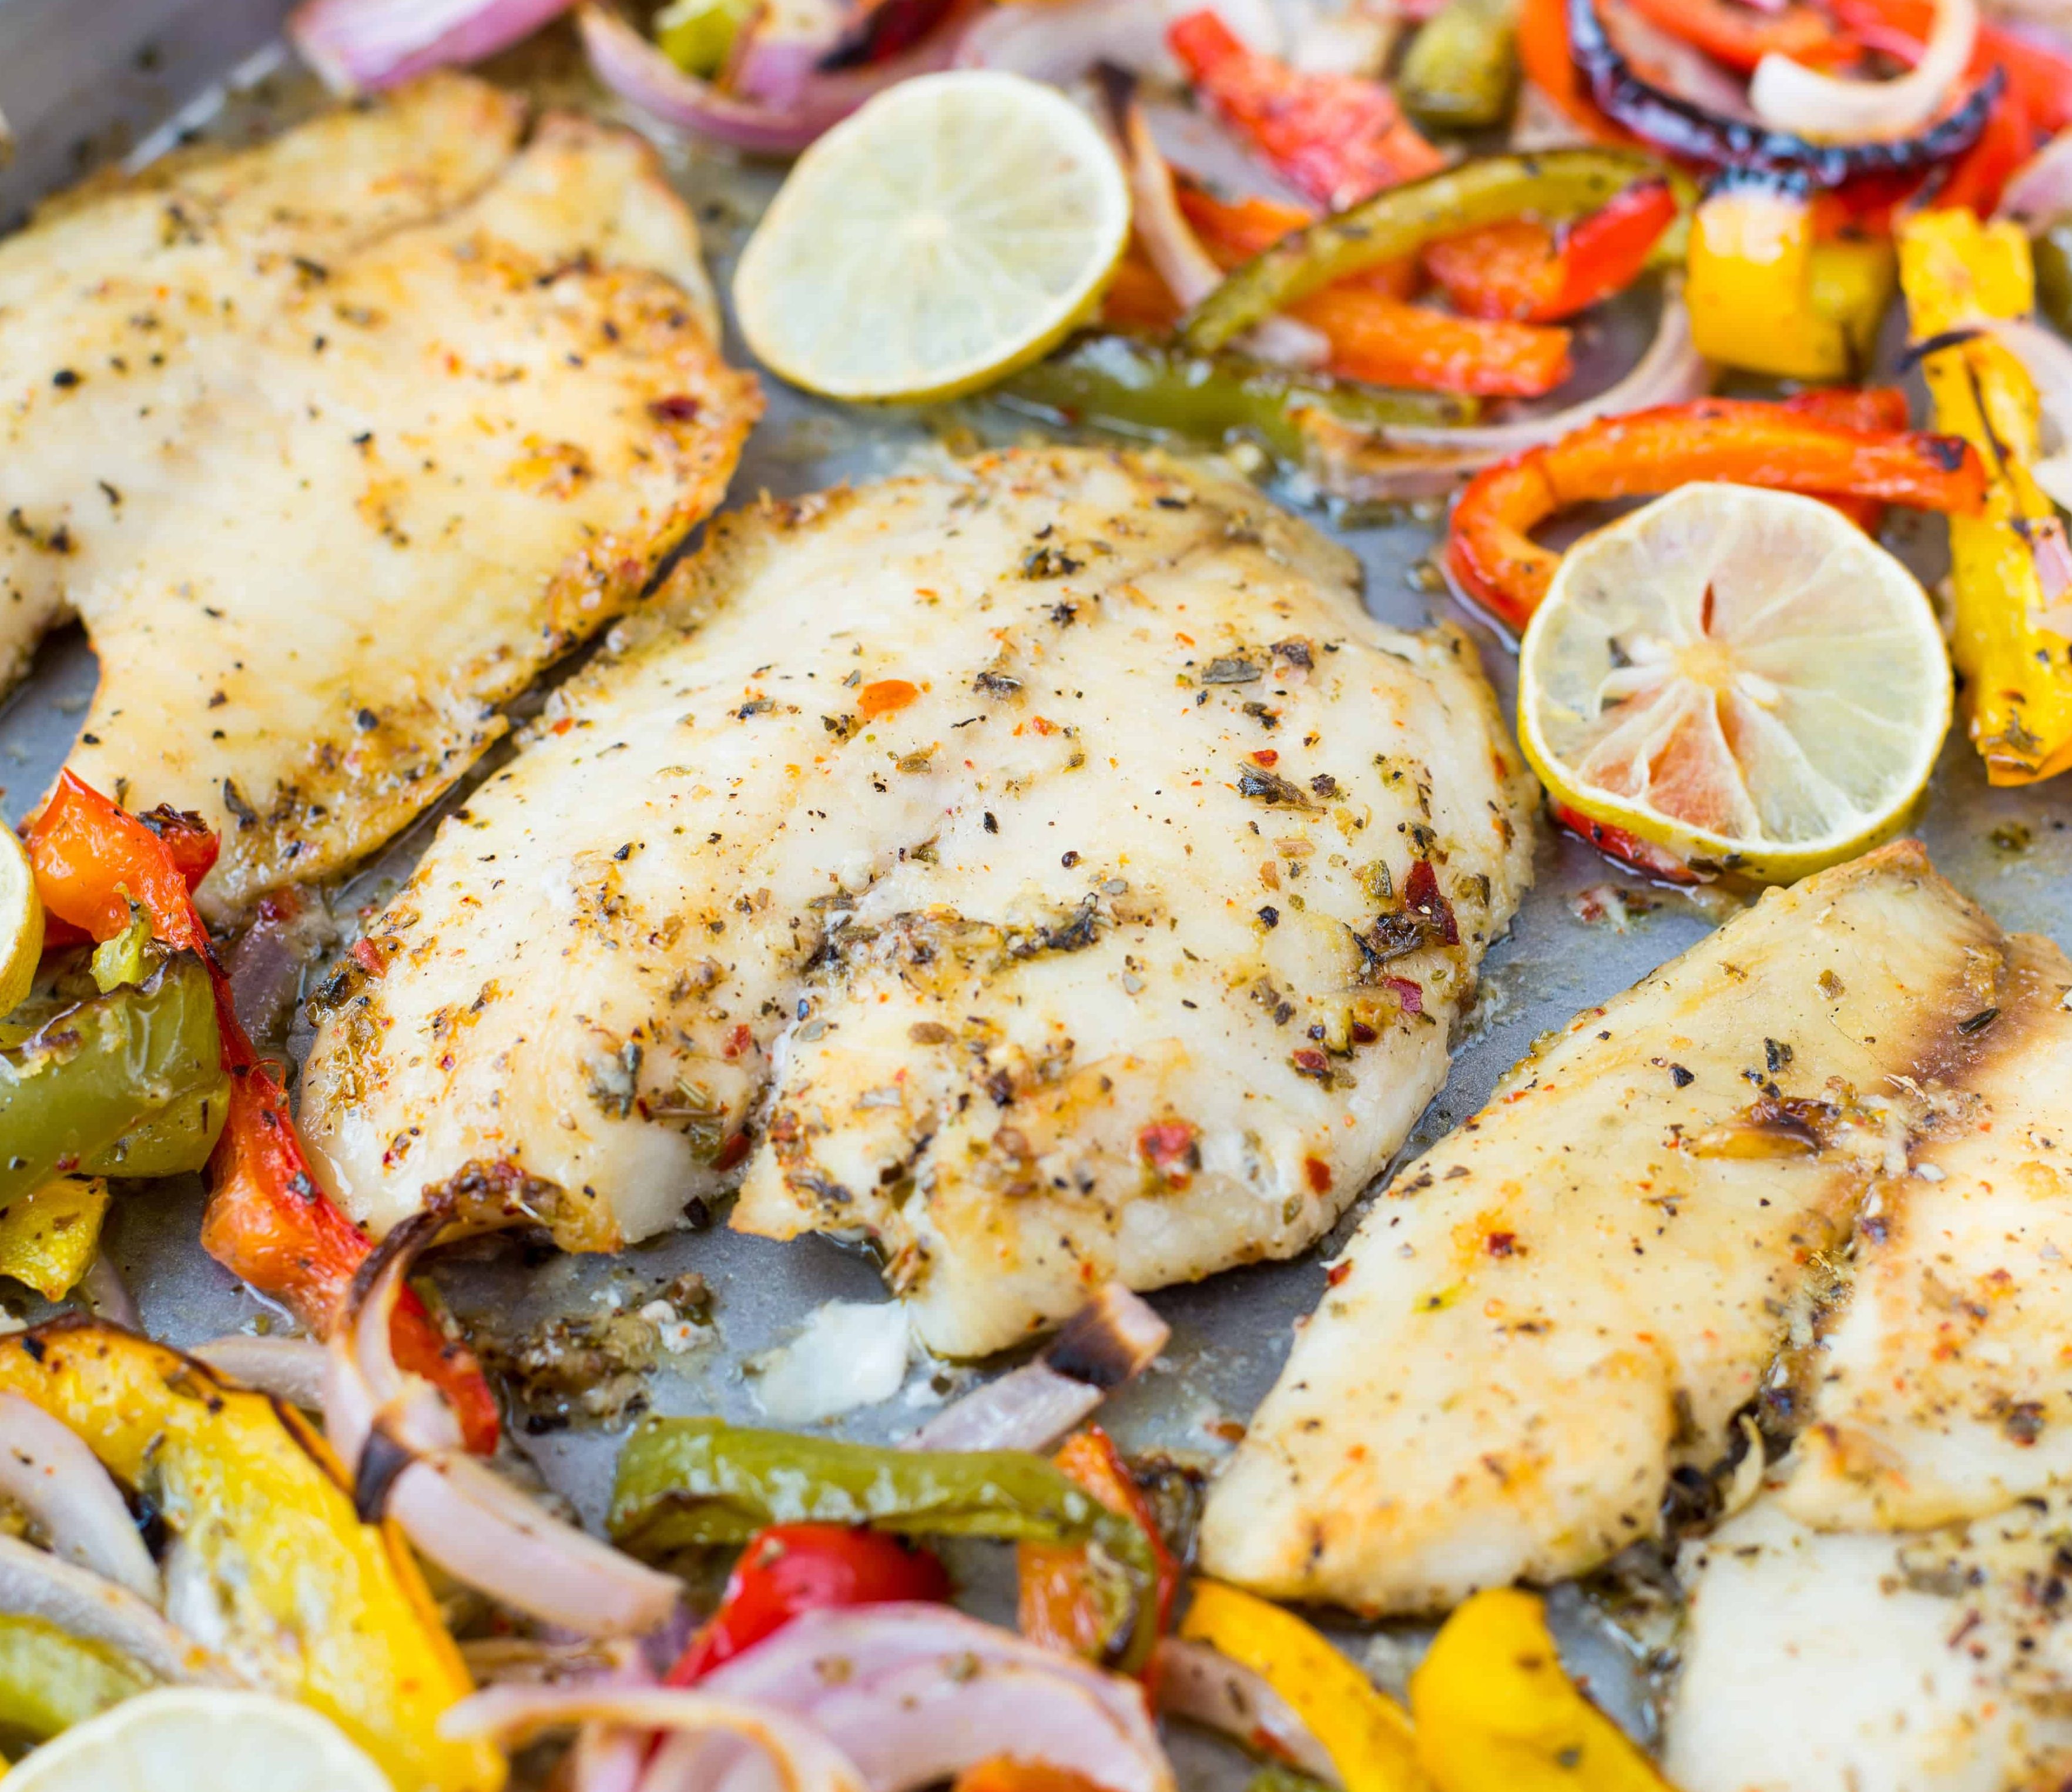 Tilapia fish with peppers and lemon rounds on a pan. Sheet Pan Dinner Options.